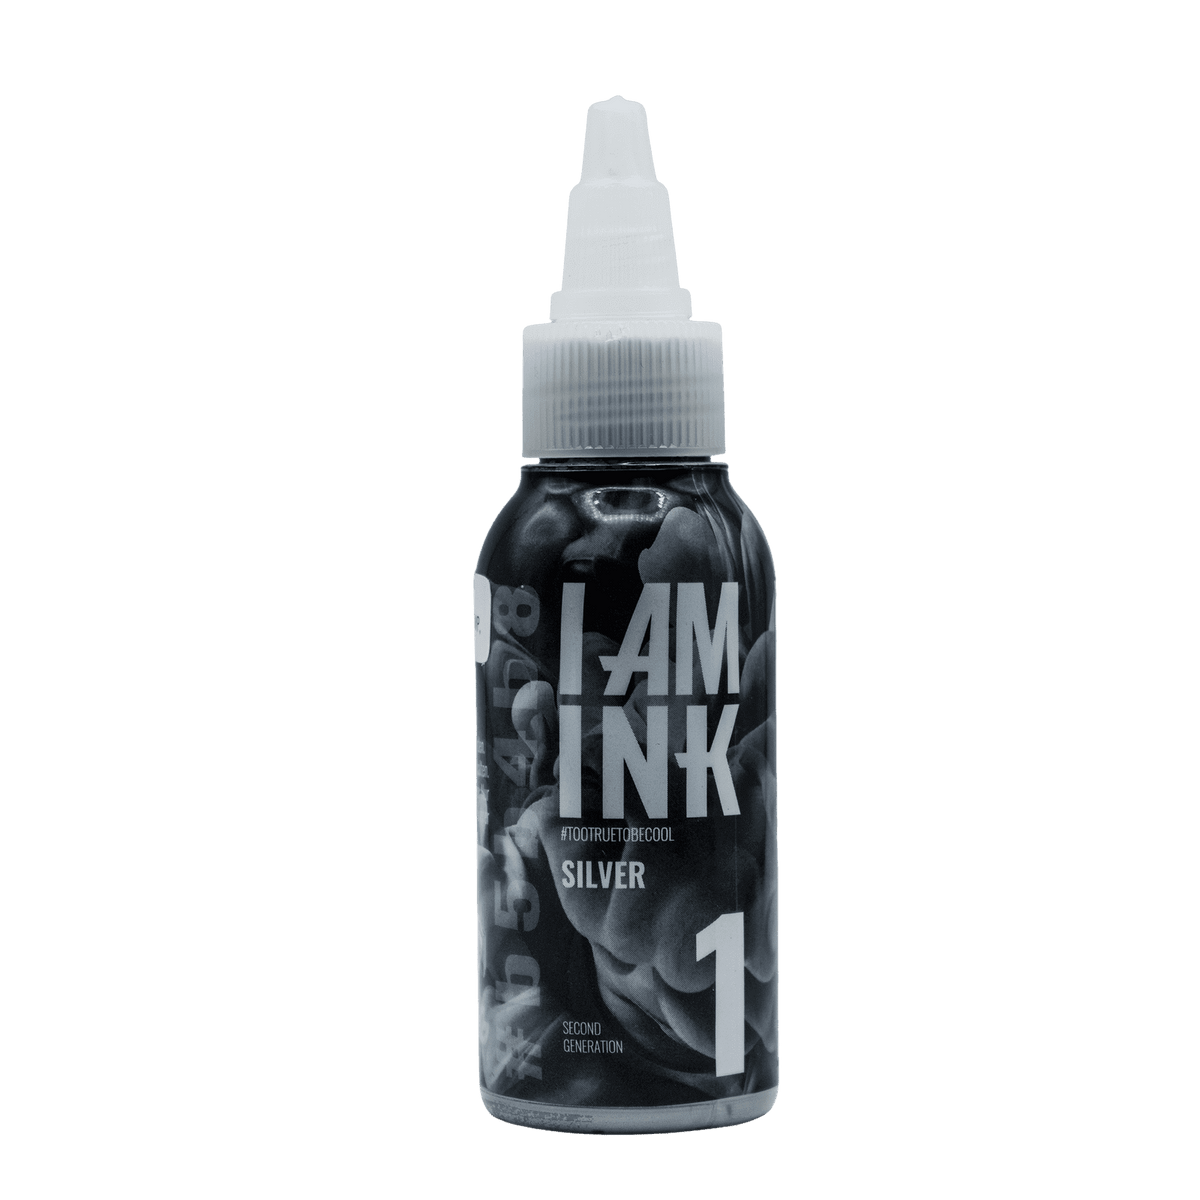 I AM INK Second Generation 1 Silver